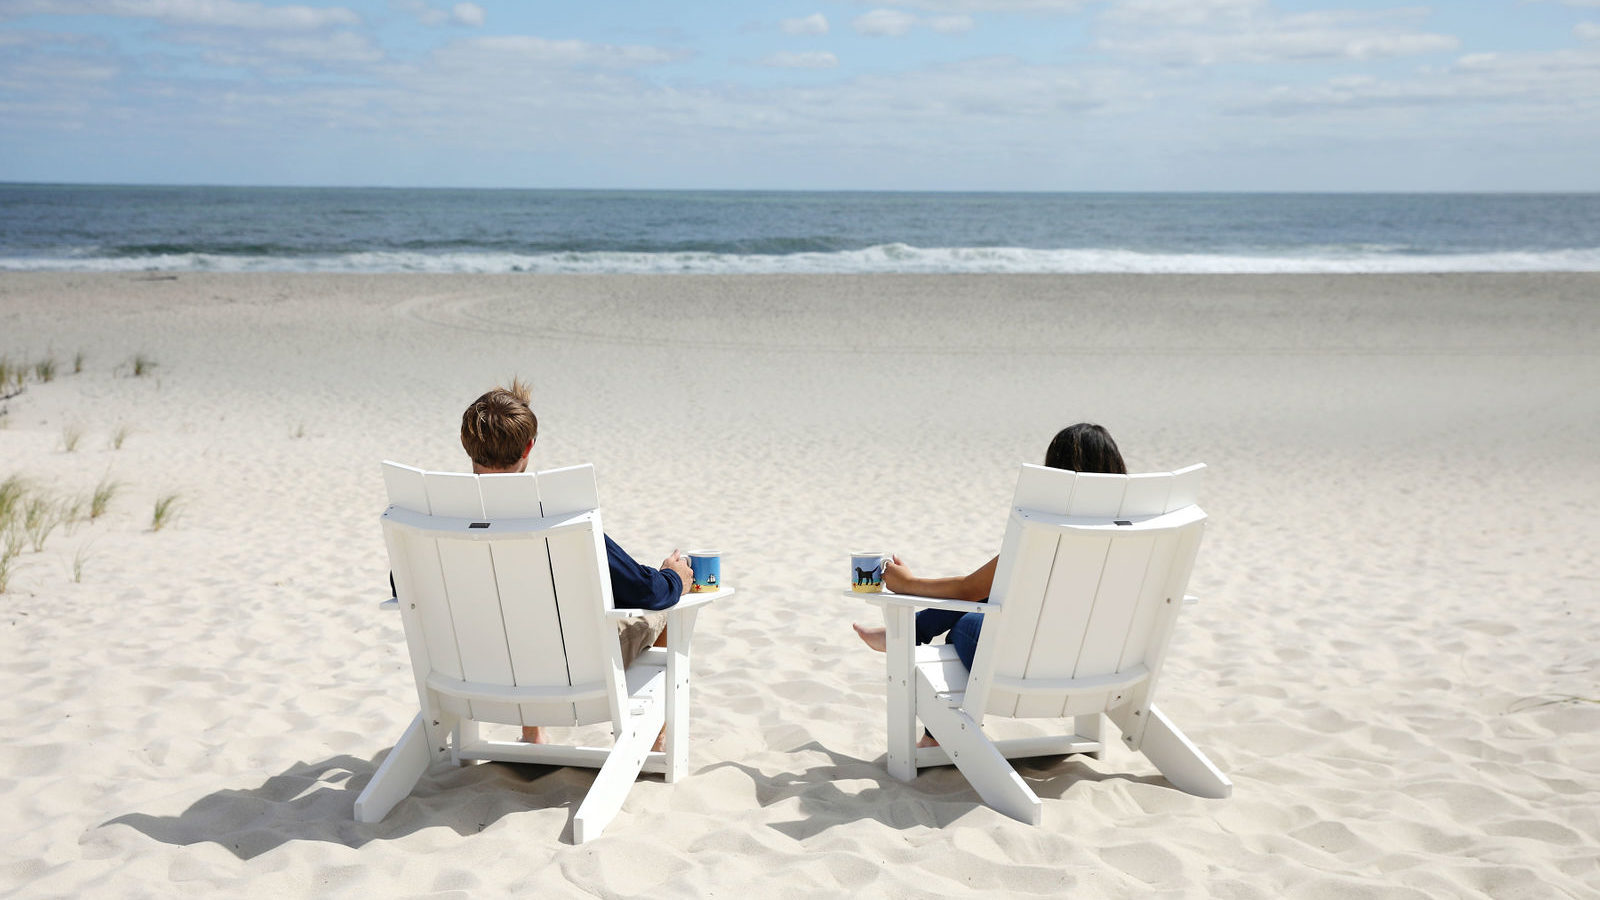 photo of two people sitting in beach chairs on a beach with beach dog mugs